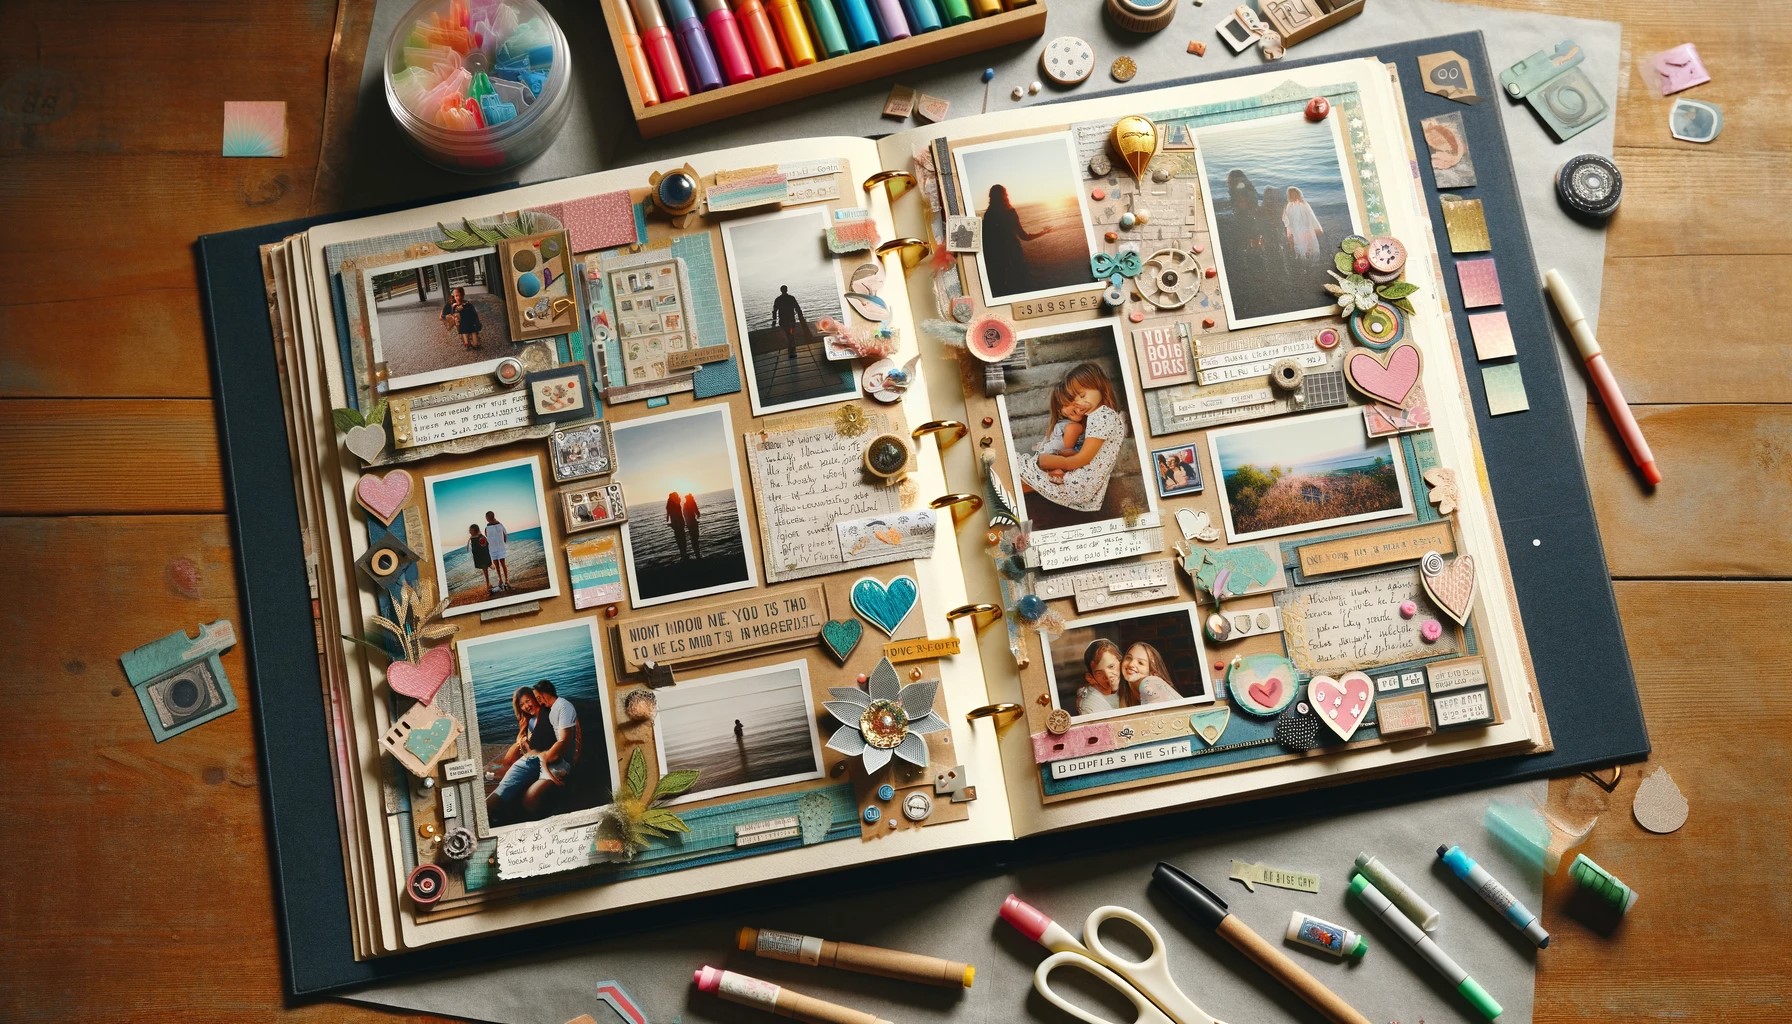 An open scrapbook with beautifully arranged photographs, embellishments, and annotations, capturing cherished memories. The scrapbook lies on a table